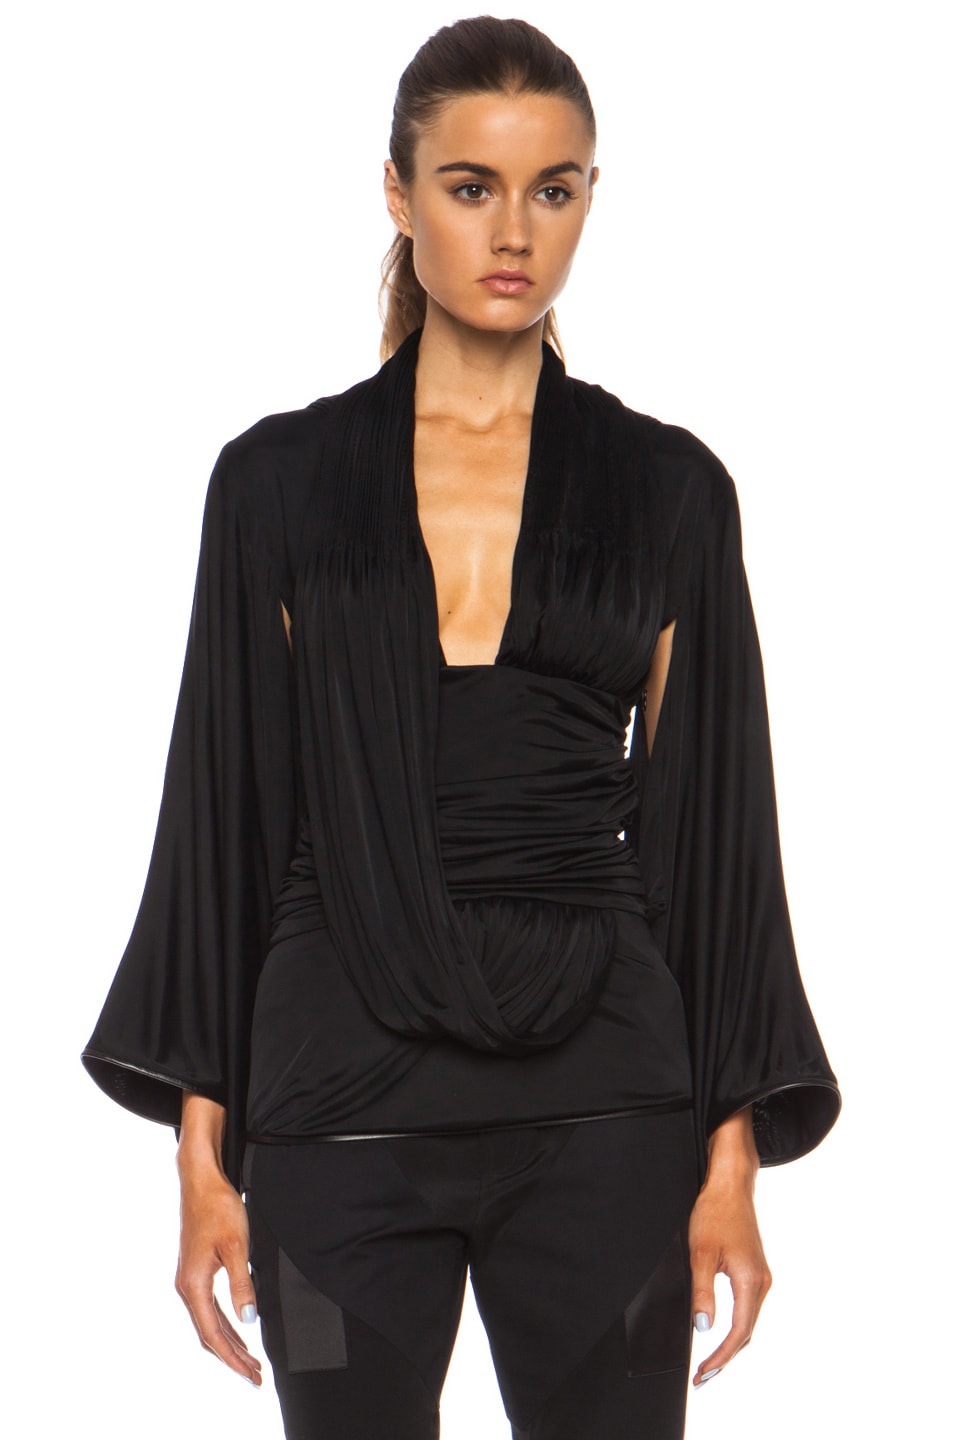 Givenchy Drape Jersey Top in Black | FWRD